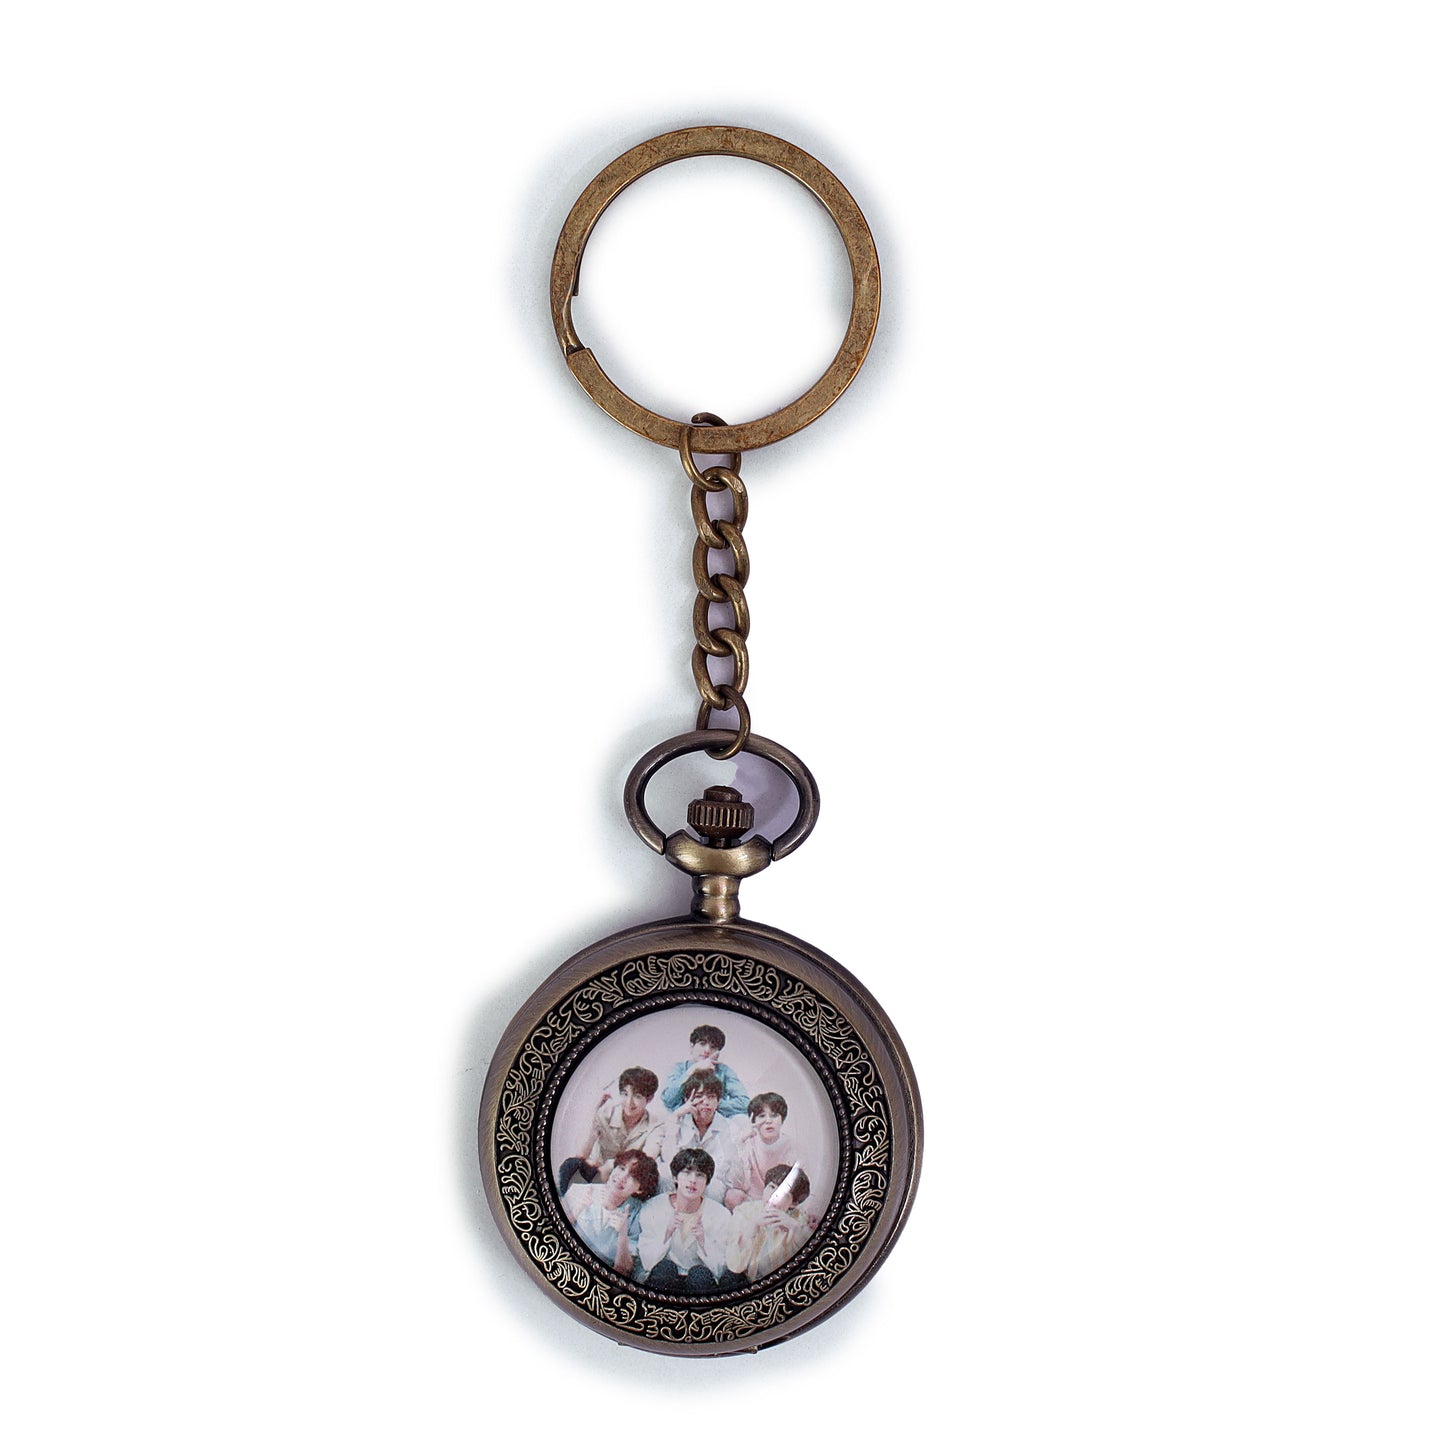 Harmony Moments BTS Inspired Vintage Pocket Watch Capturing Time with the Bangtan Boys